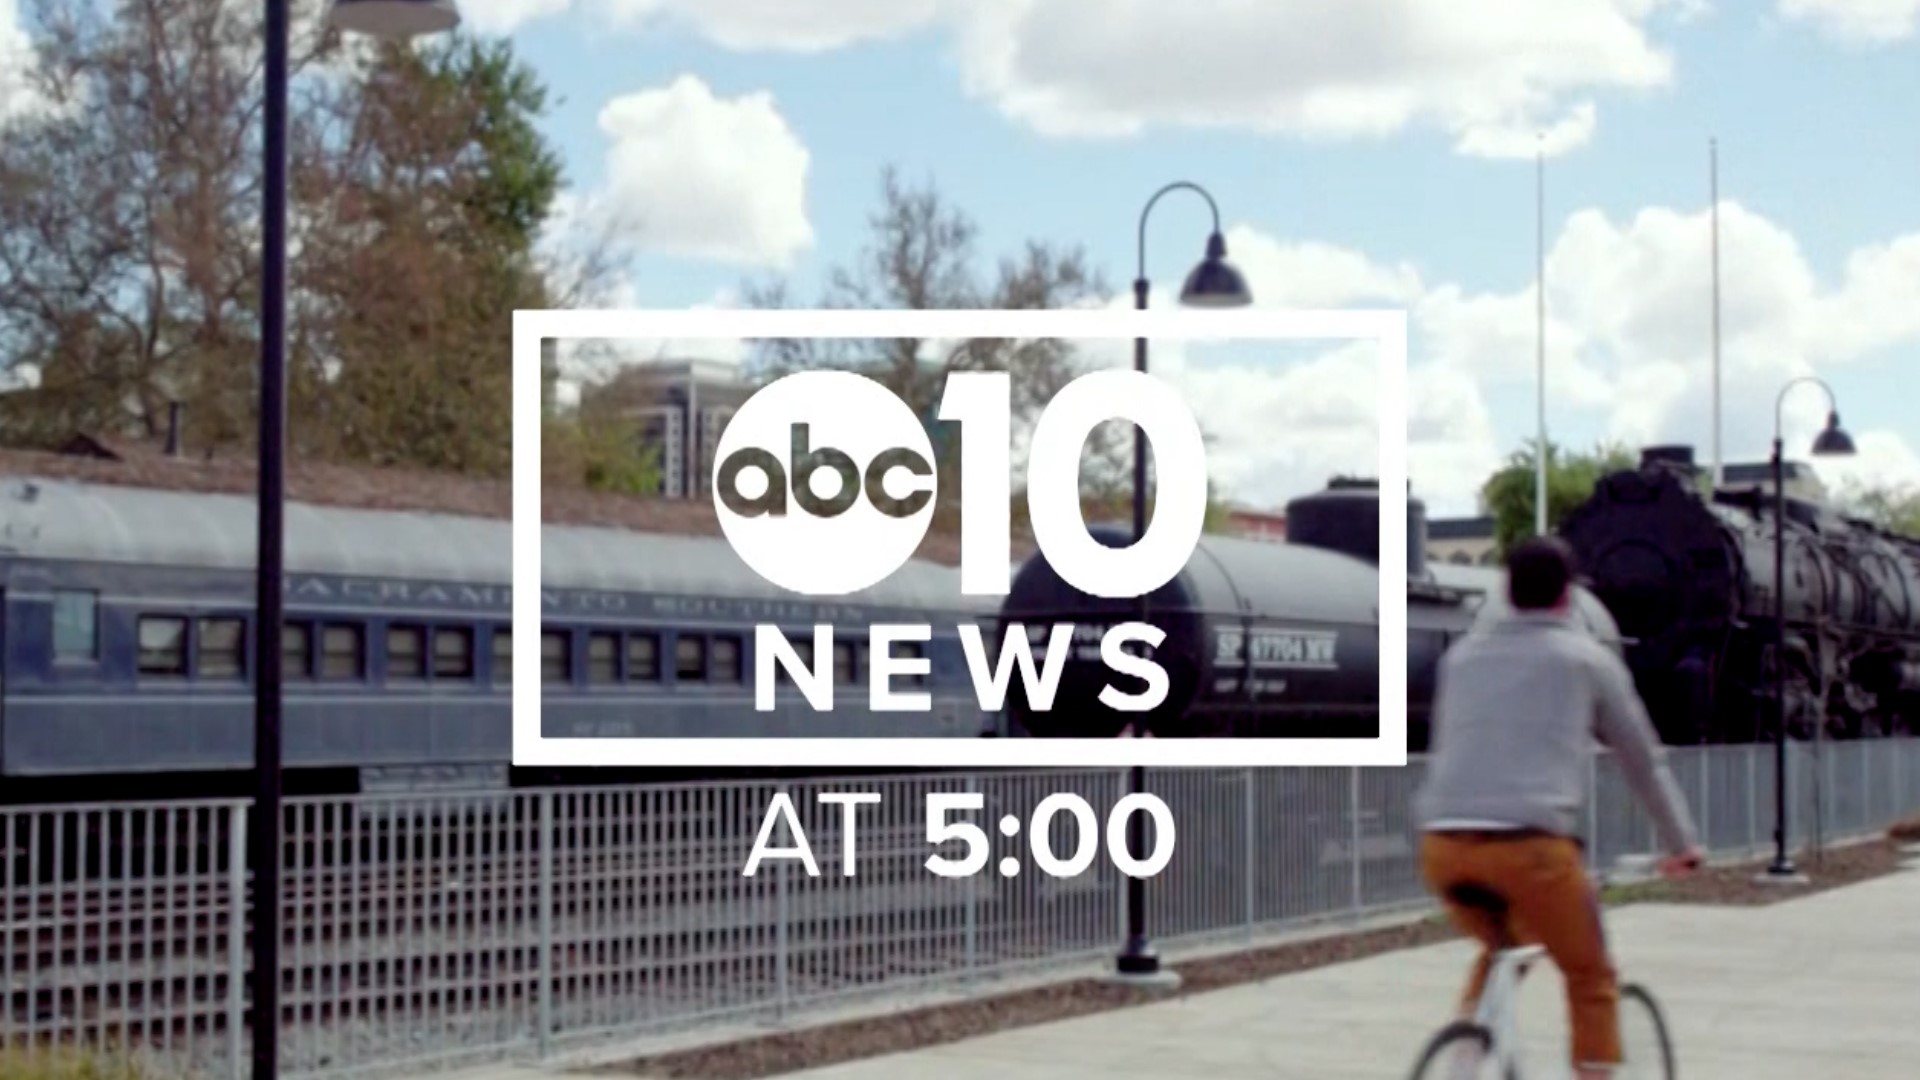 The ABC10 News team has the latest local news and weather, including a recap of everything that happened today in our communities.